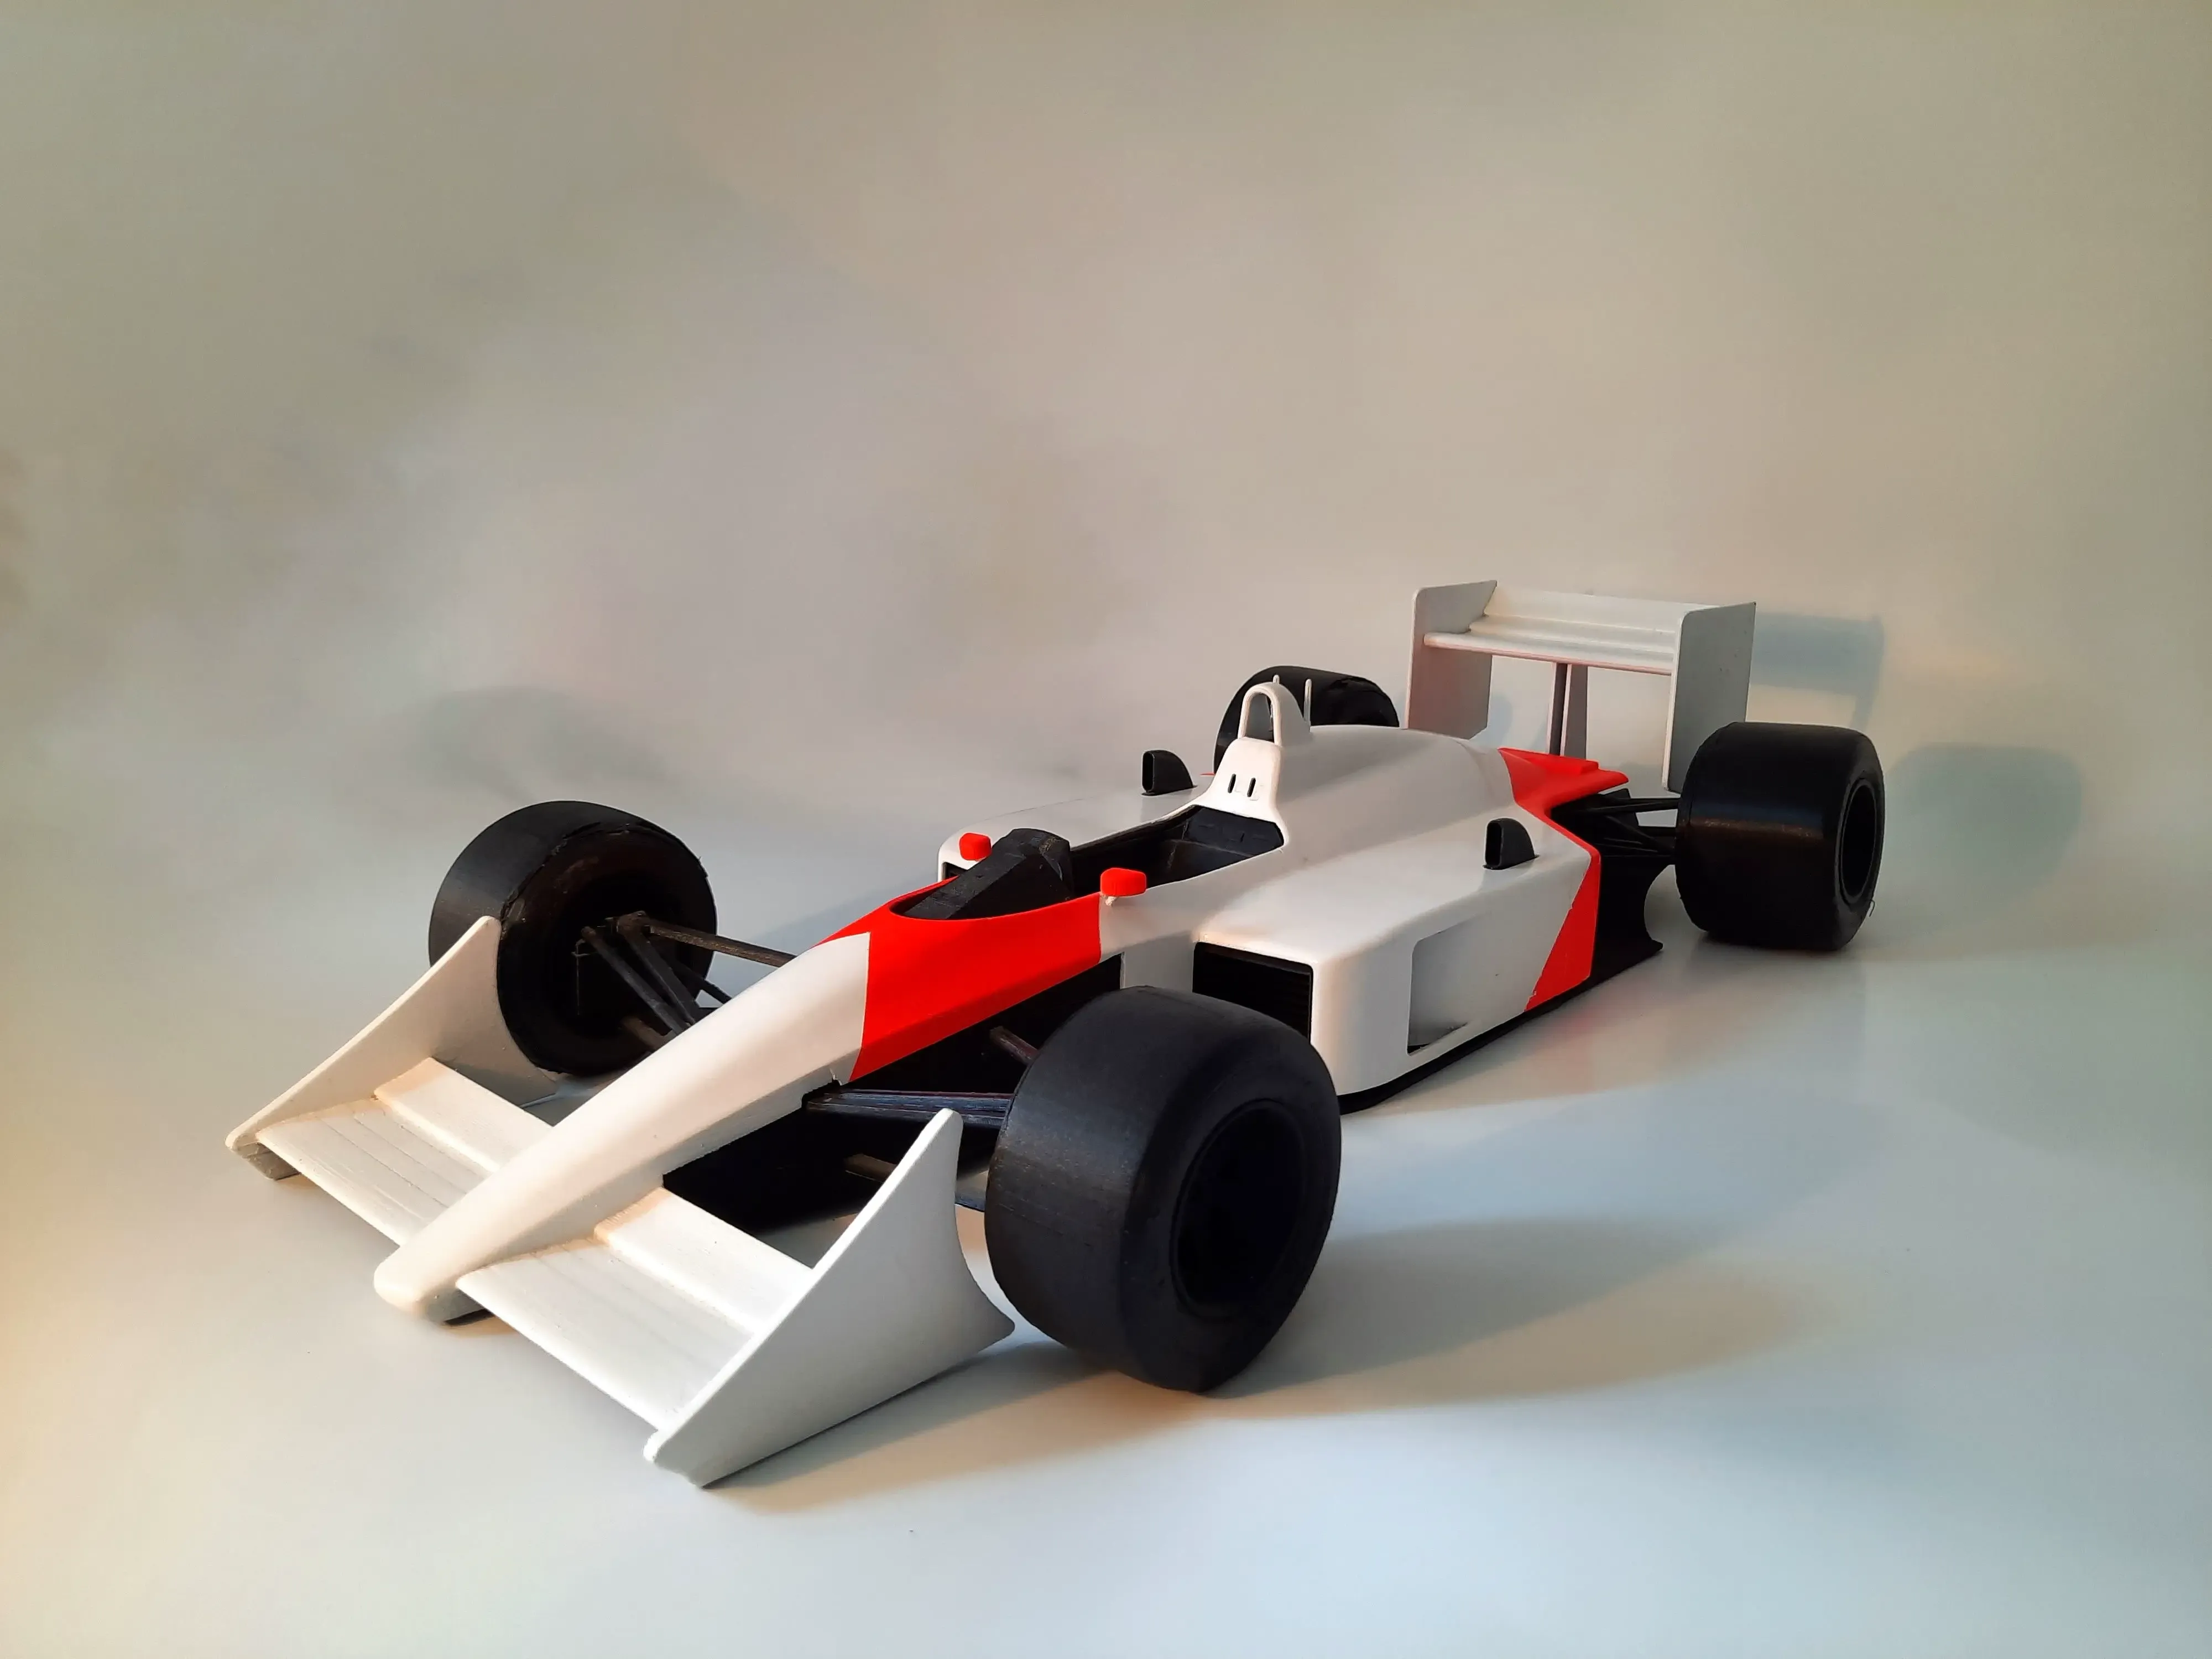 1:8 SCALE 1988 FORMULA RACER - FULLY PRINTABLE WITH INTERNAL